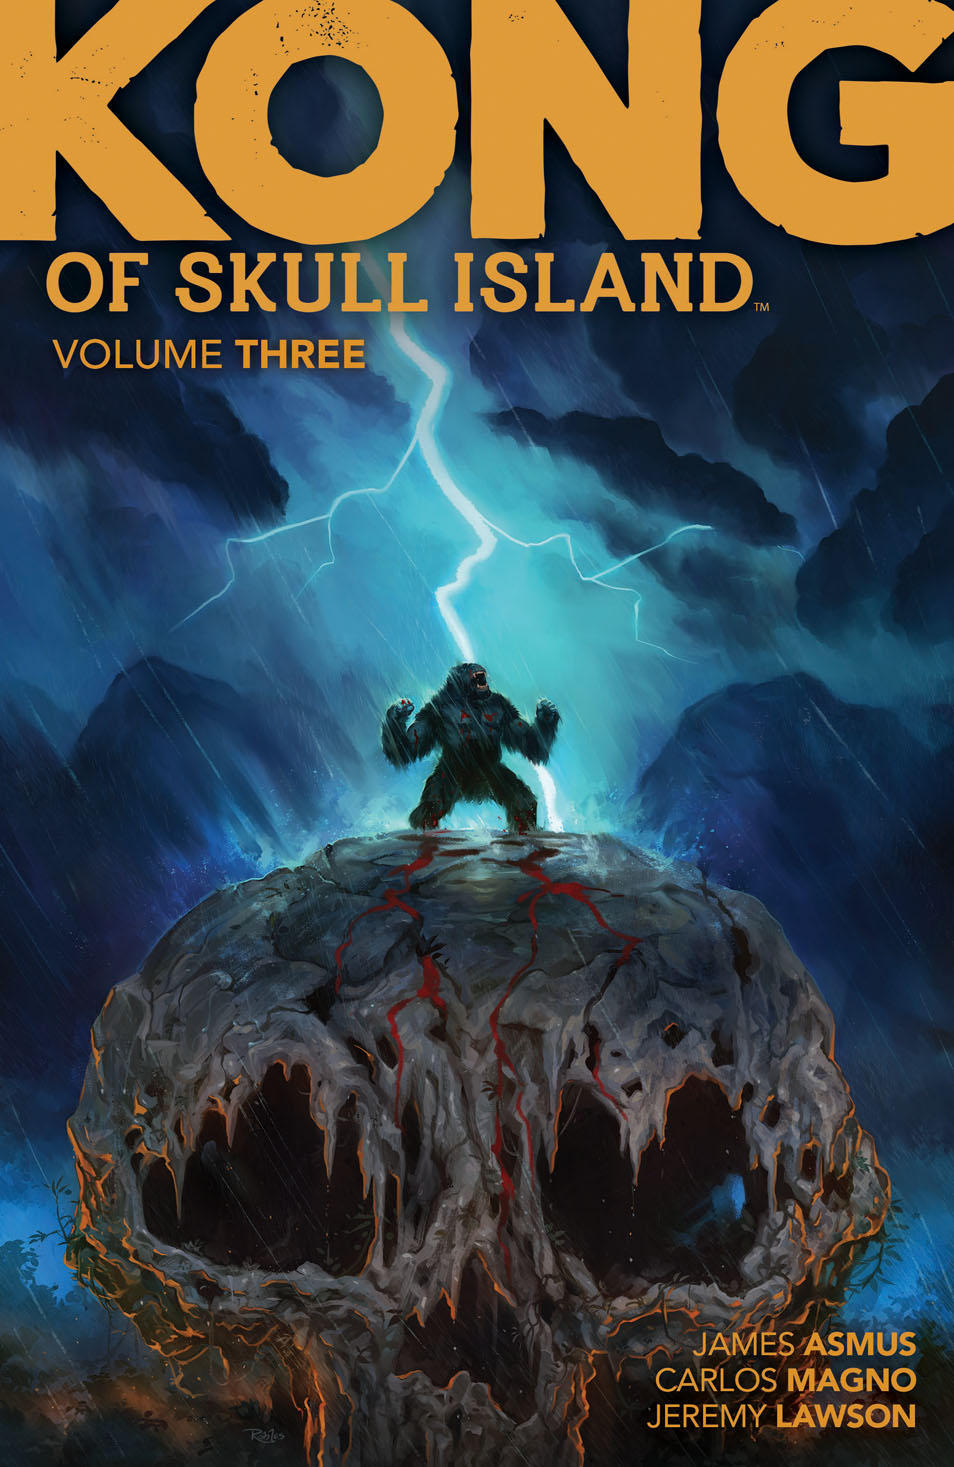 This image is the cover for the book Kong of Skull Island Vol. 3, Kong of Skull Island